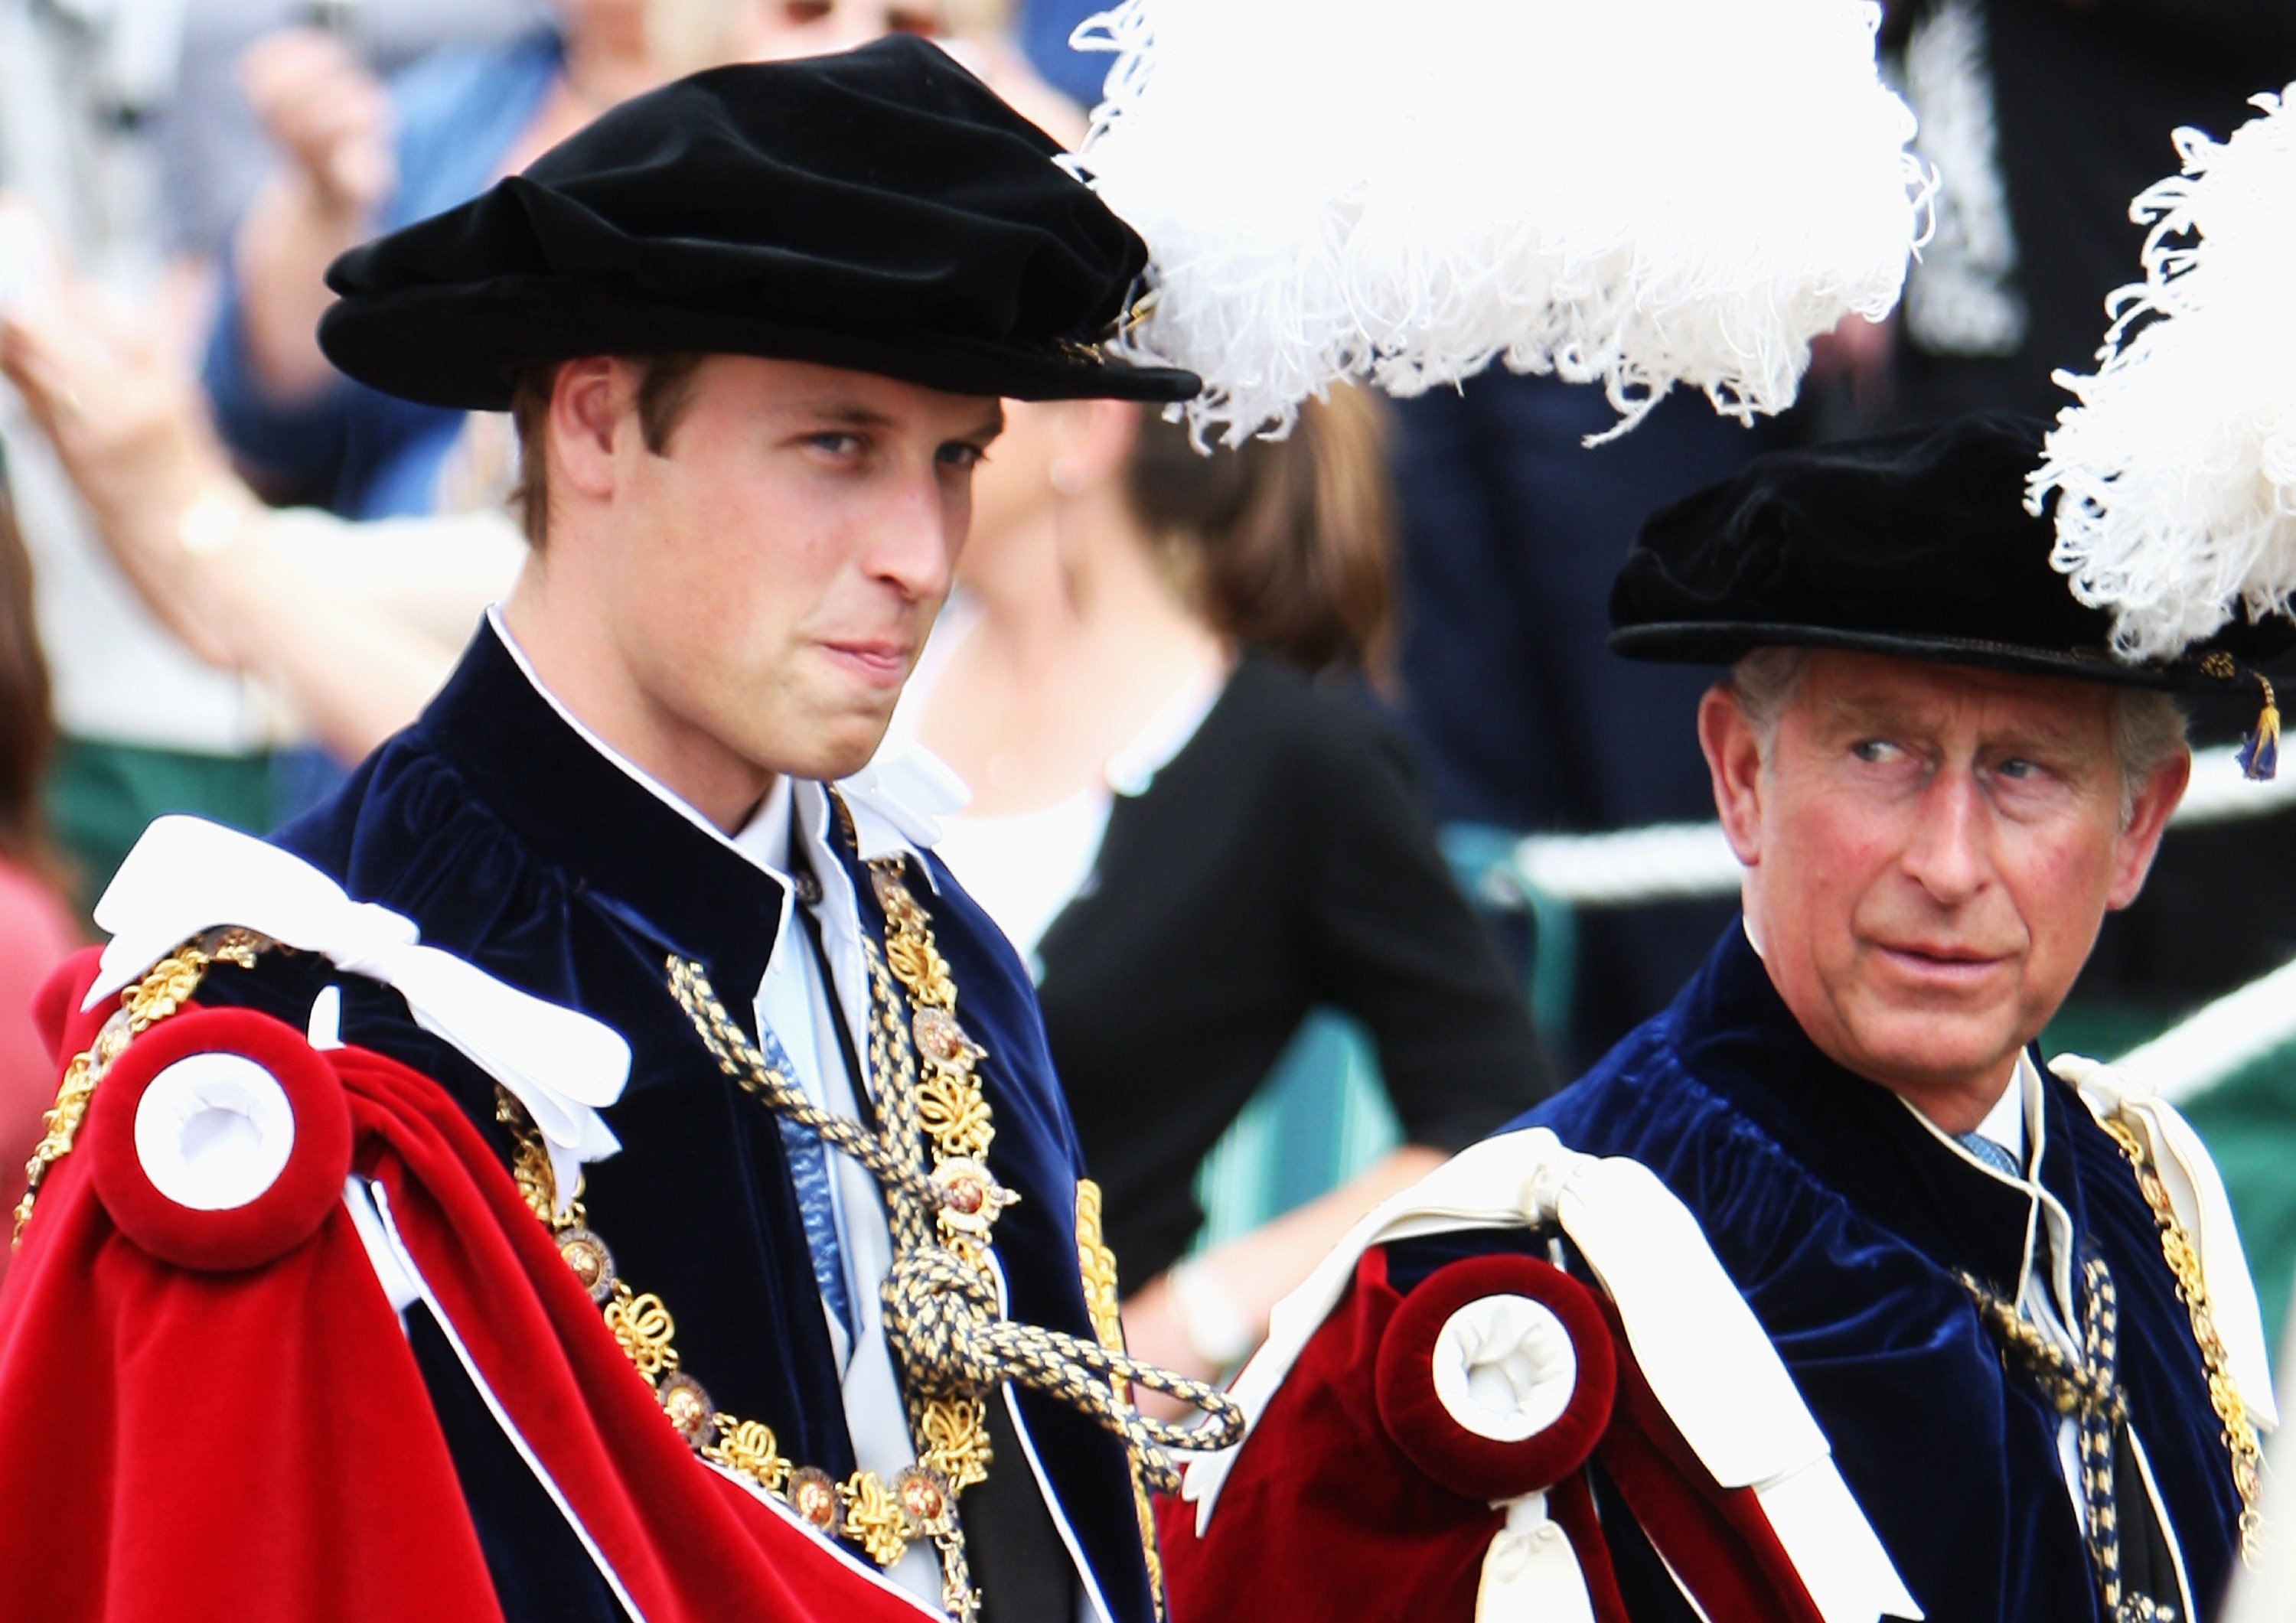 HRH Prince William arrives next to his father Prince Charles, Prince of Wales as they walk to St. George's Chapel to partake in Garter Day, the 660th Anniversary Service, on June 16, 2008 in Windsor, England. | Source: Getty Images